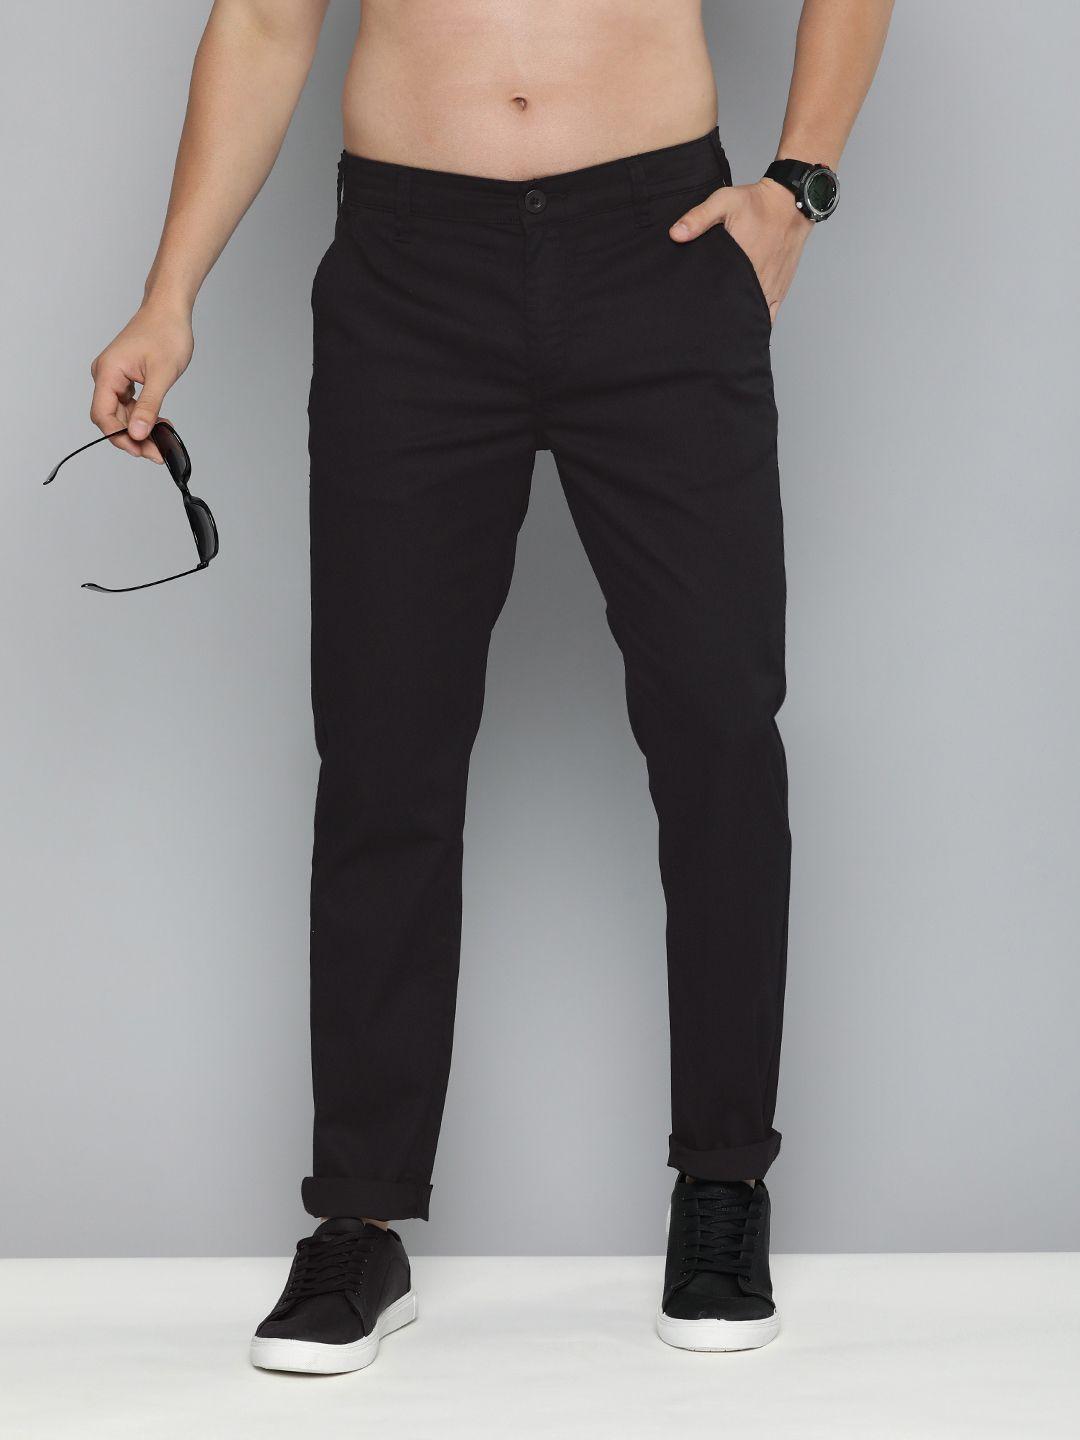 here&now-men-mid-rise-slim-fit-chinos